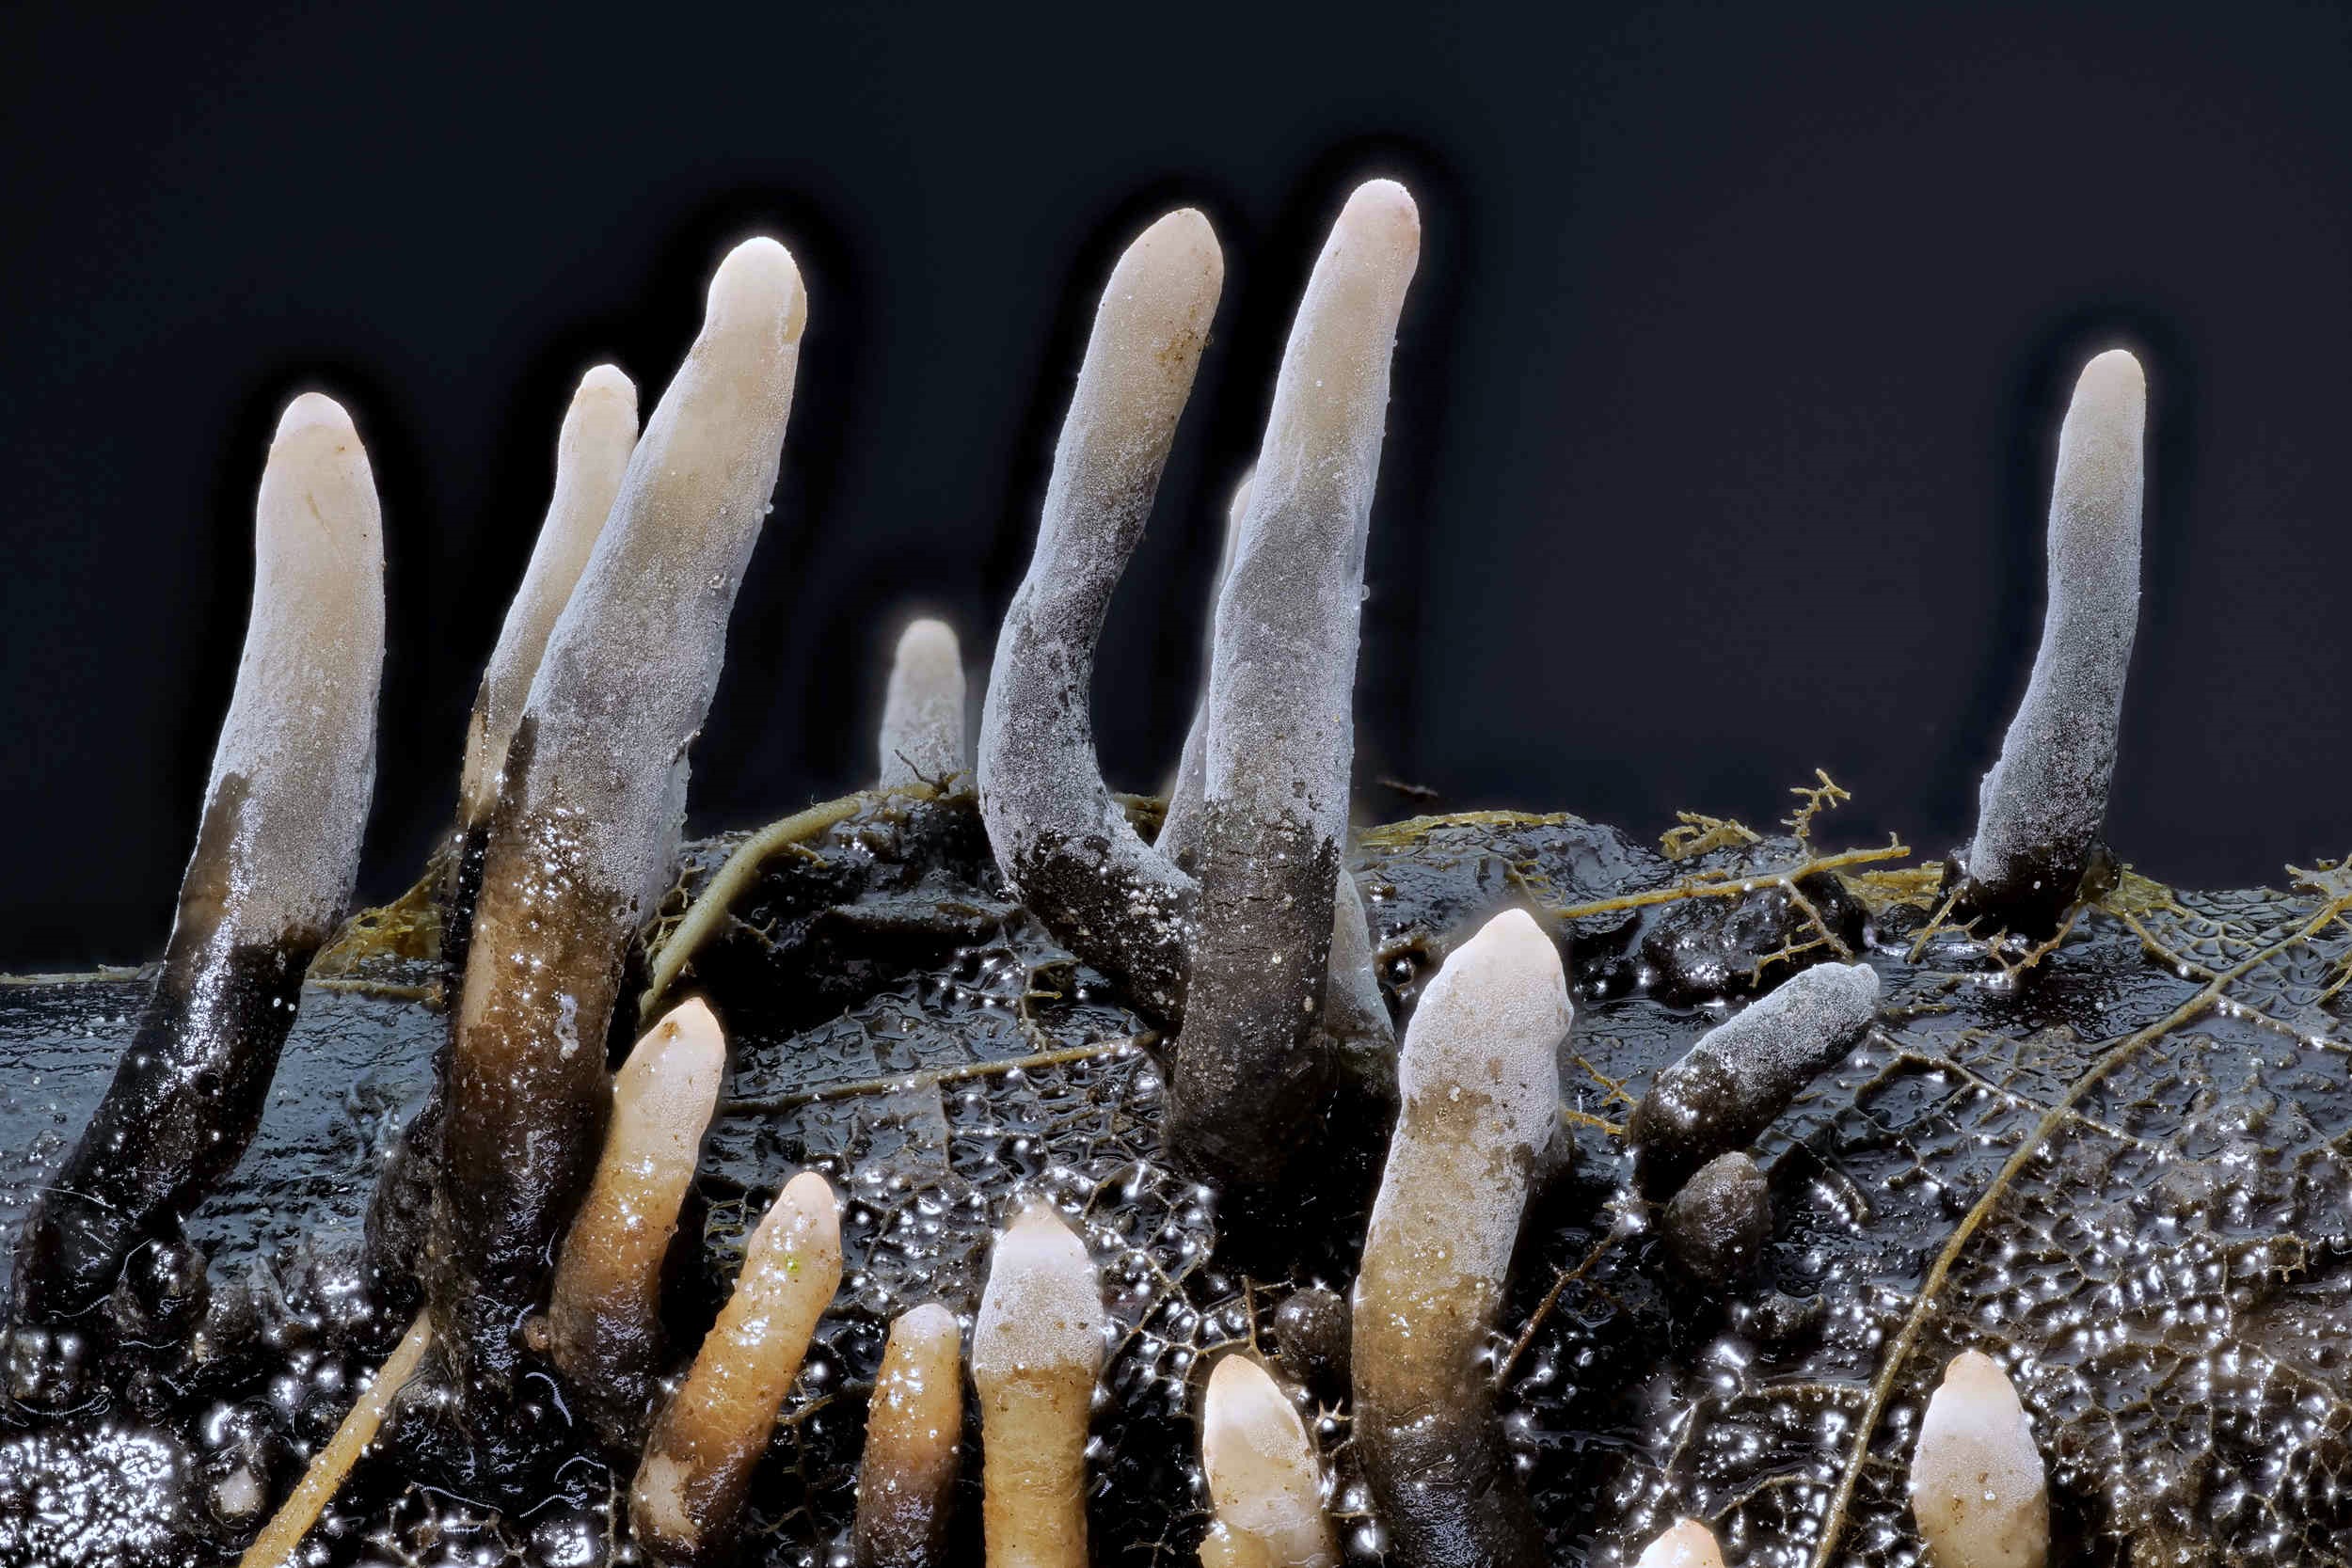 Xylaria longipes – Langstielige Ahorn-Holzkeule